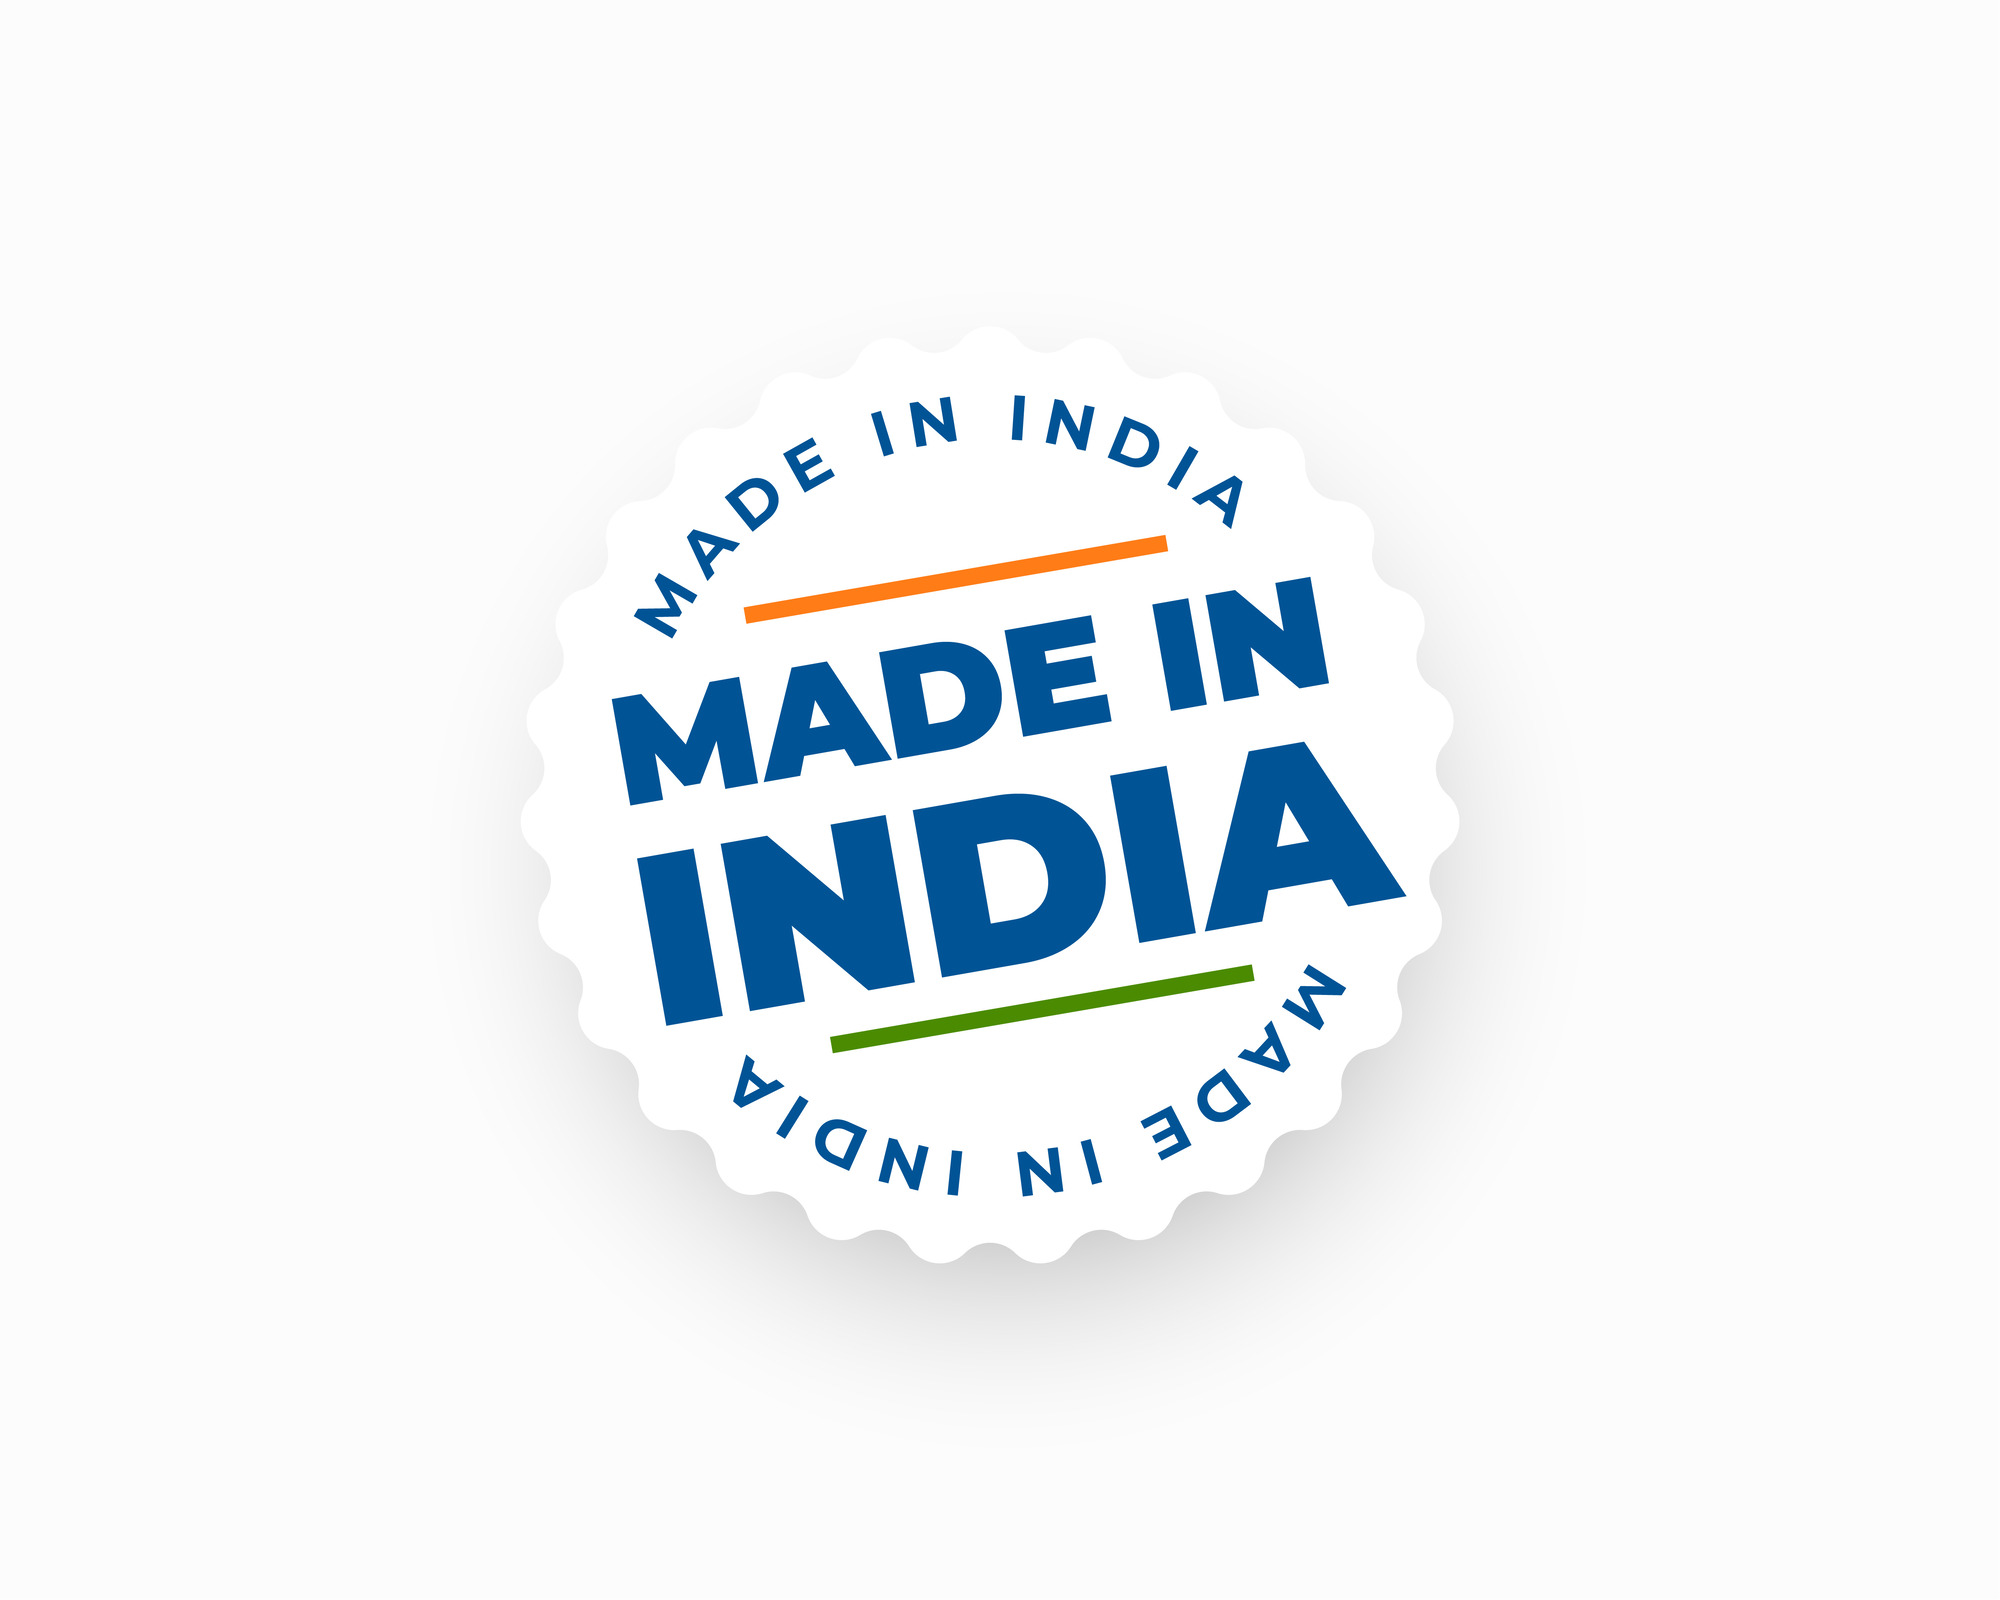 Indian firms to showcase 'Make in India' investment opportunities in China  | Economy & Policy News - Business Standard